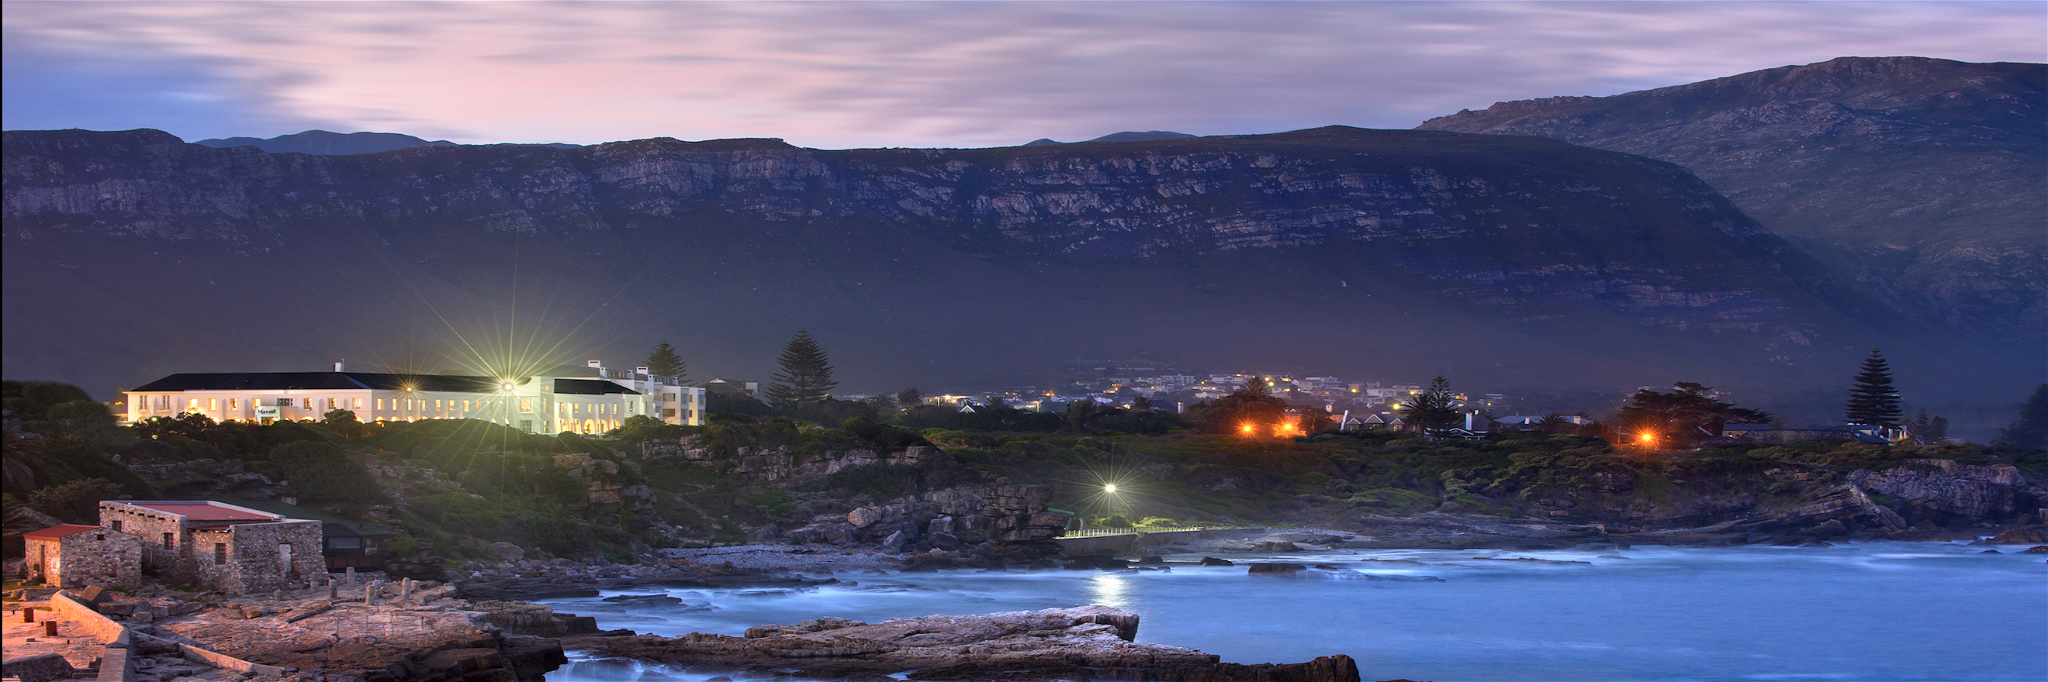 The Marine&nbsp;is one of South Africa's most spectacular seaside hotels.&nbsp;